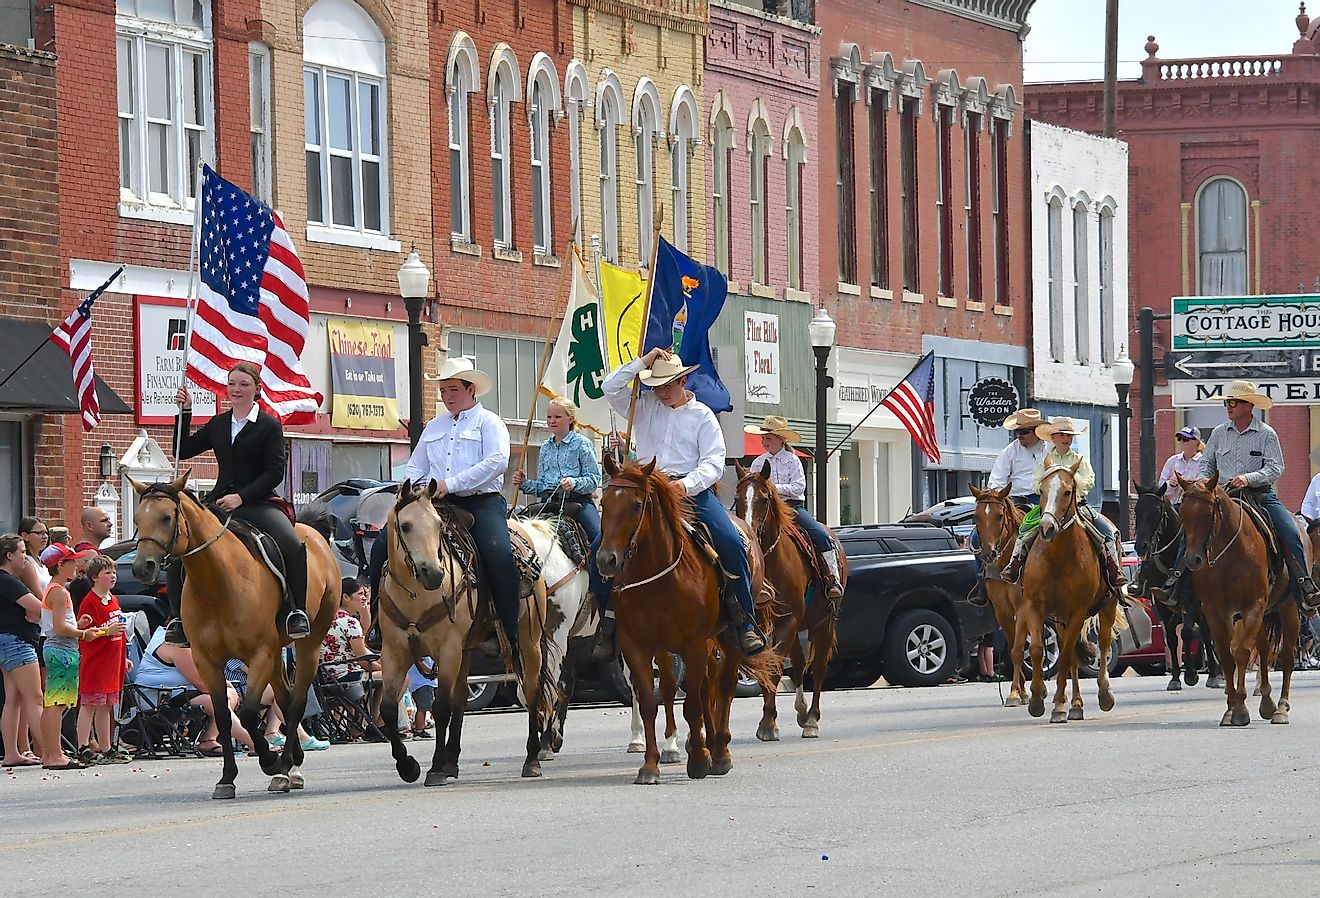 Members of the Local 4 H club ride their horses on Main Street in the Washunga Days Parade in Council Grove, Kansas. Image credit mark reinstein via Shutterstock